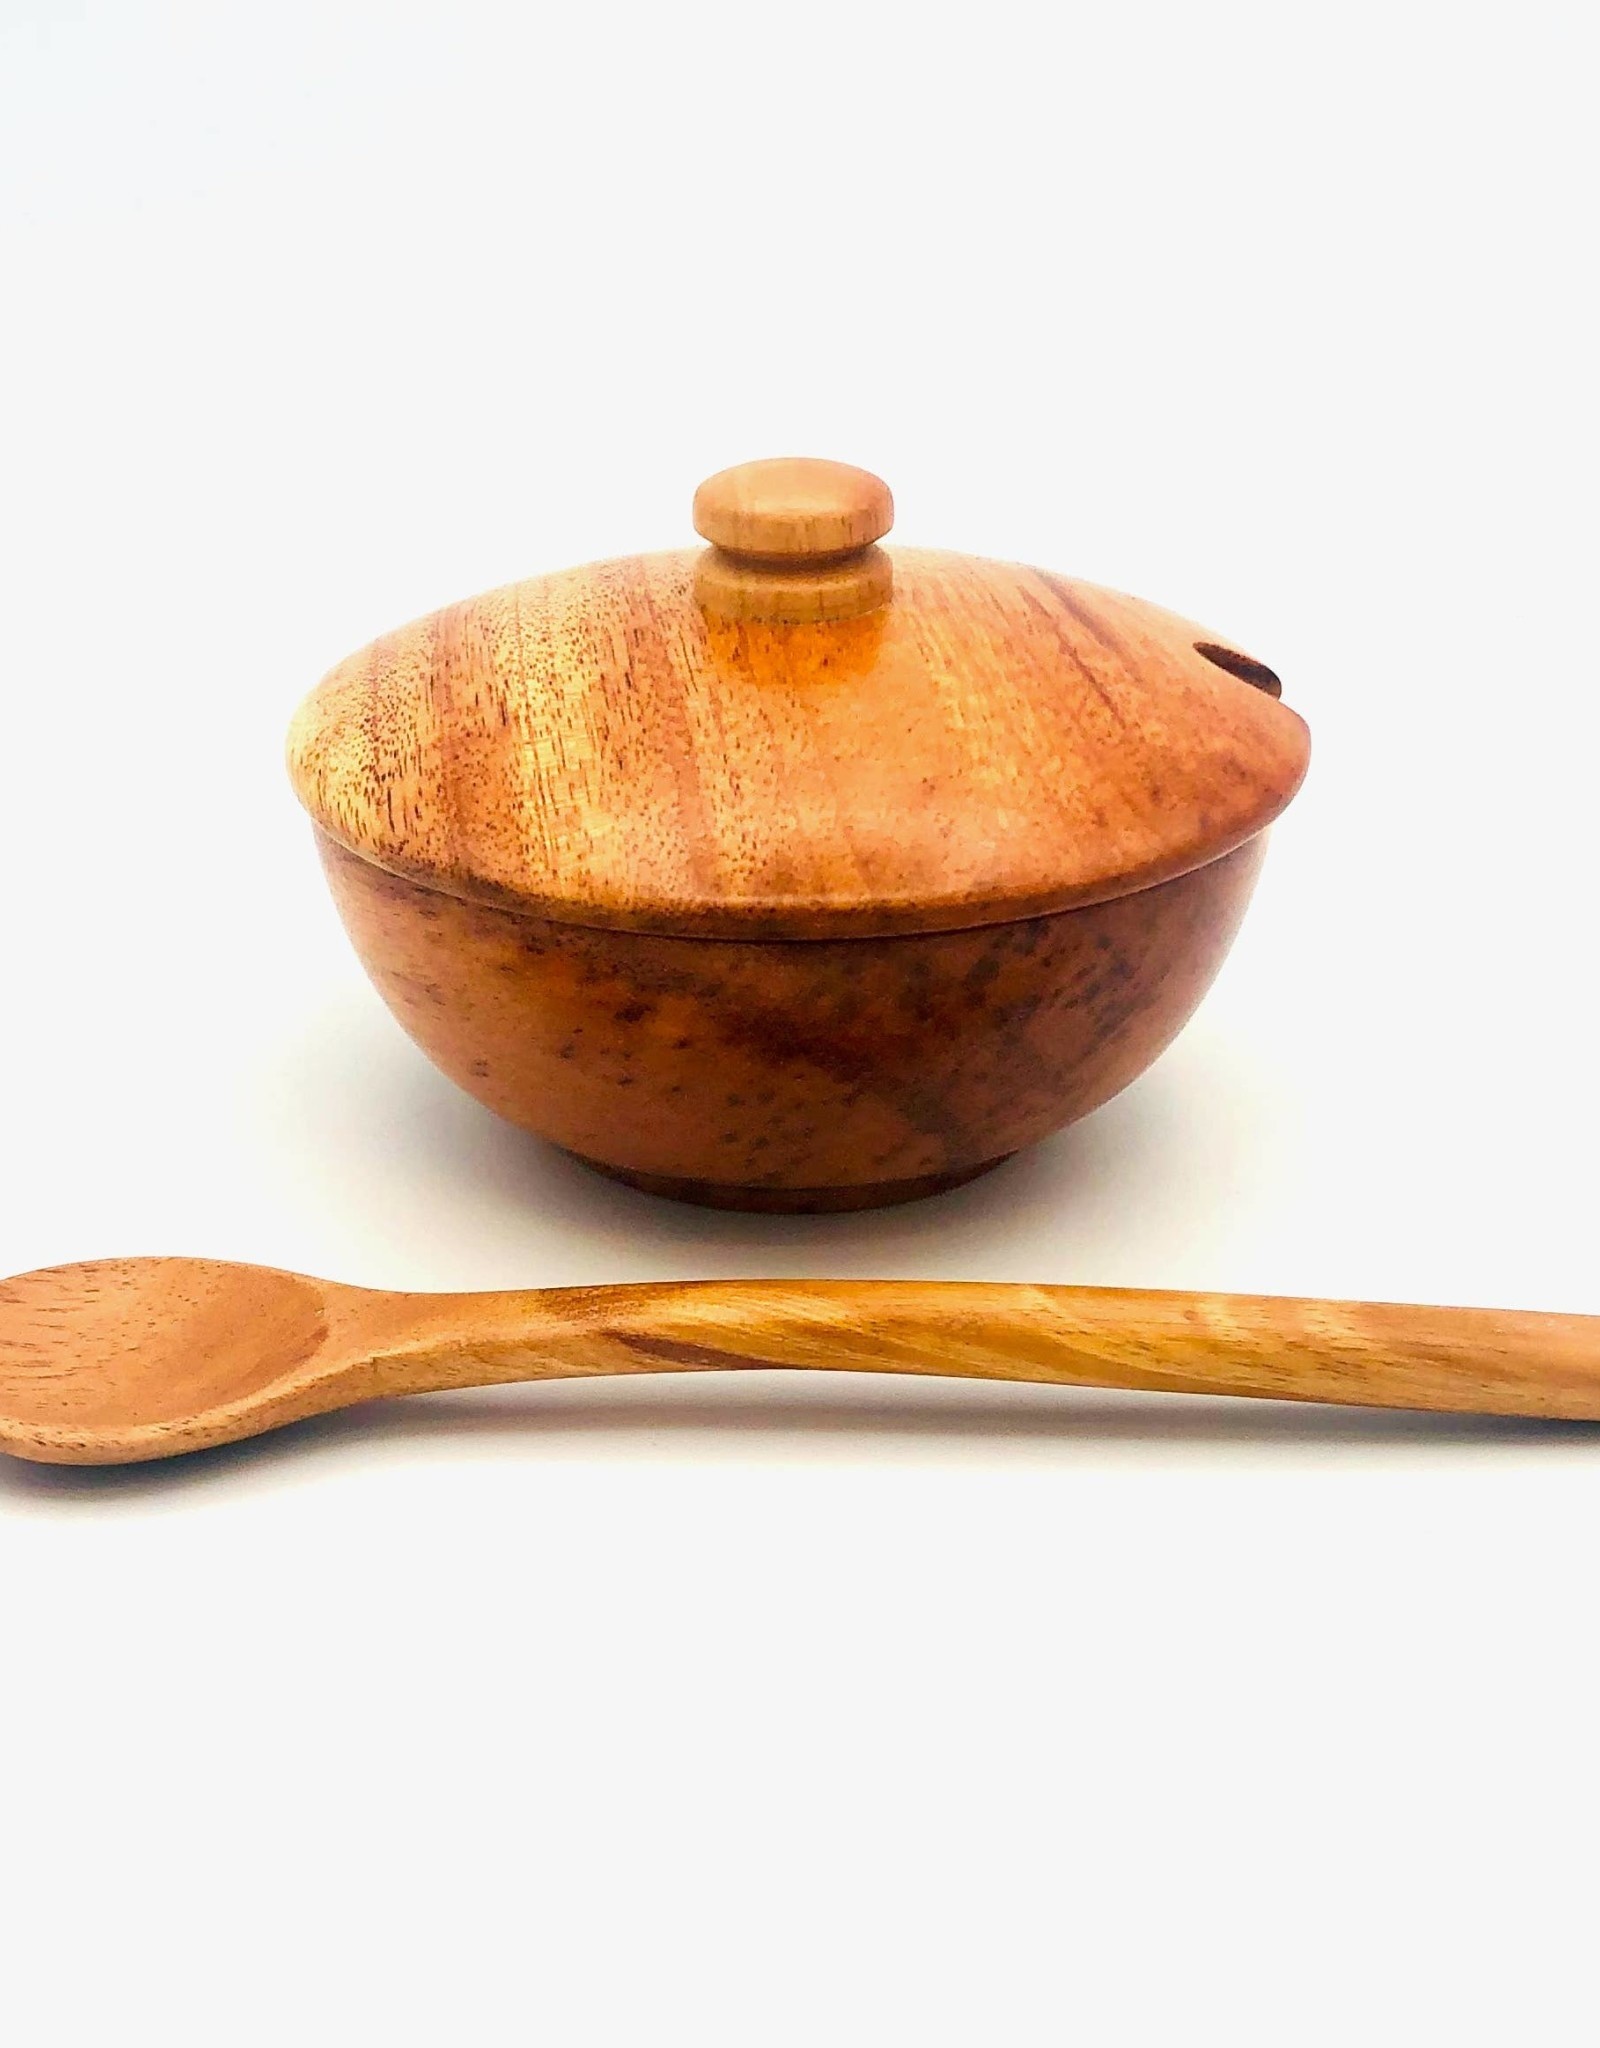 Women of the Cloud Forest Tropical Hardwood Spice Bowl with Spoon and Lid